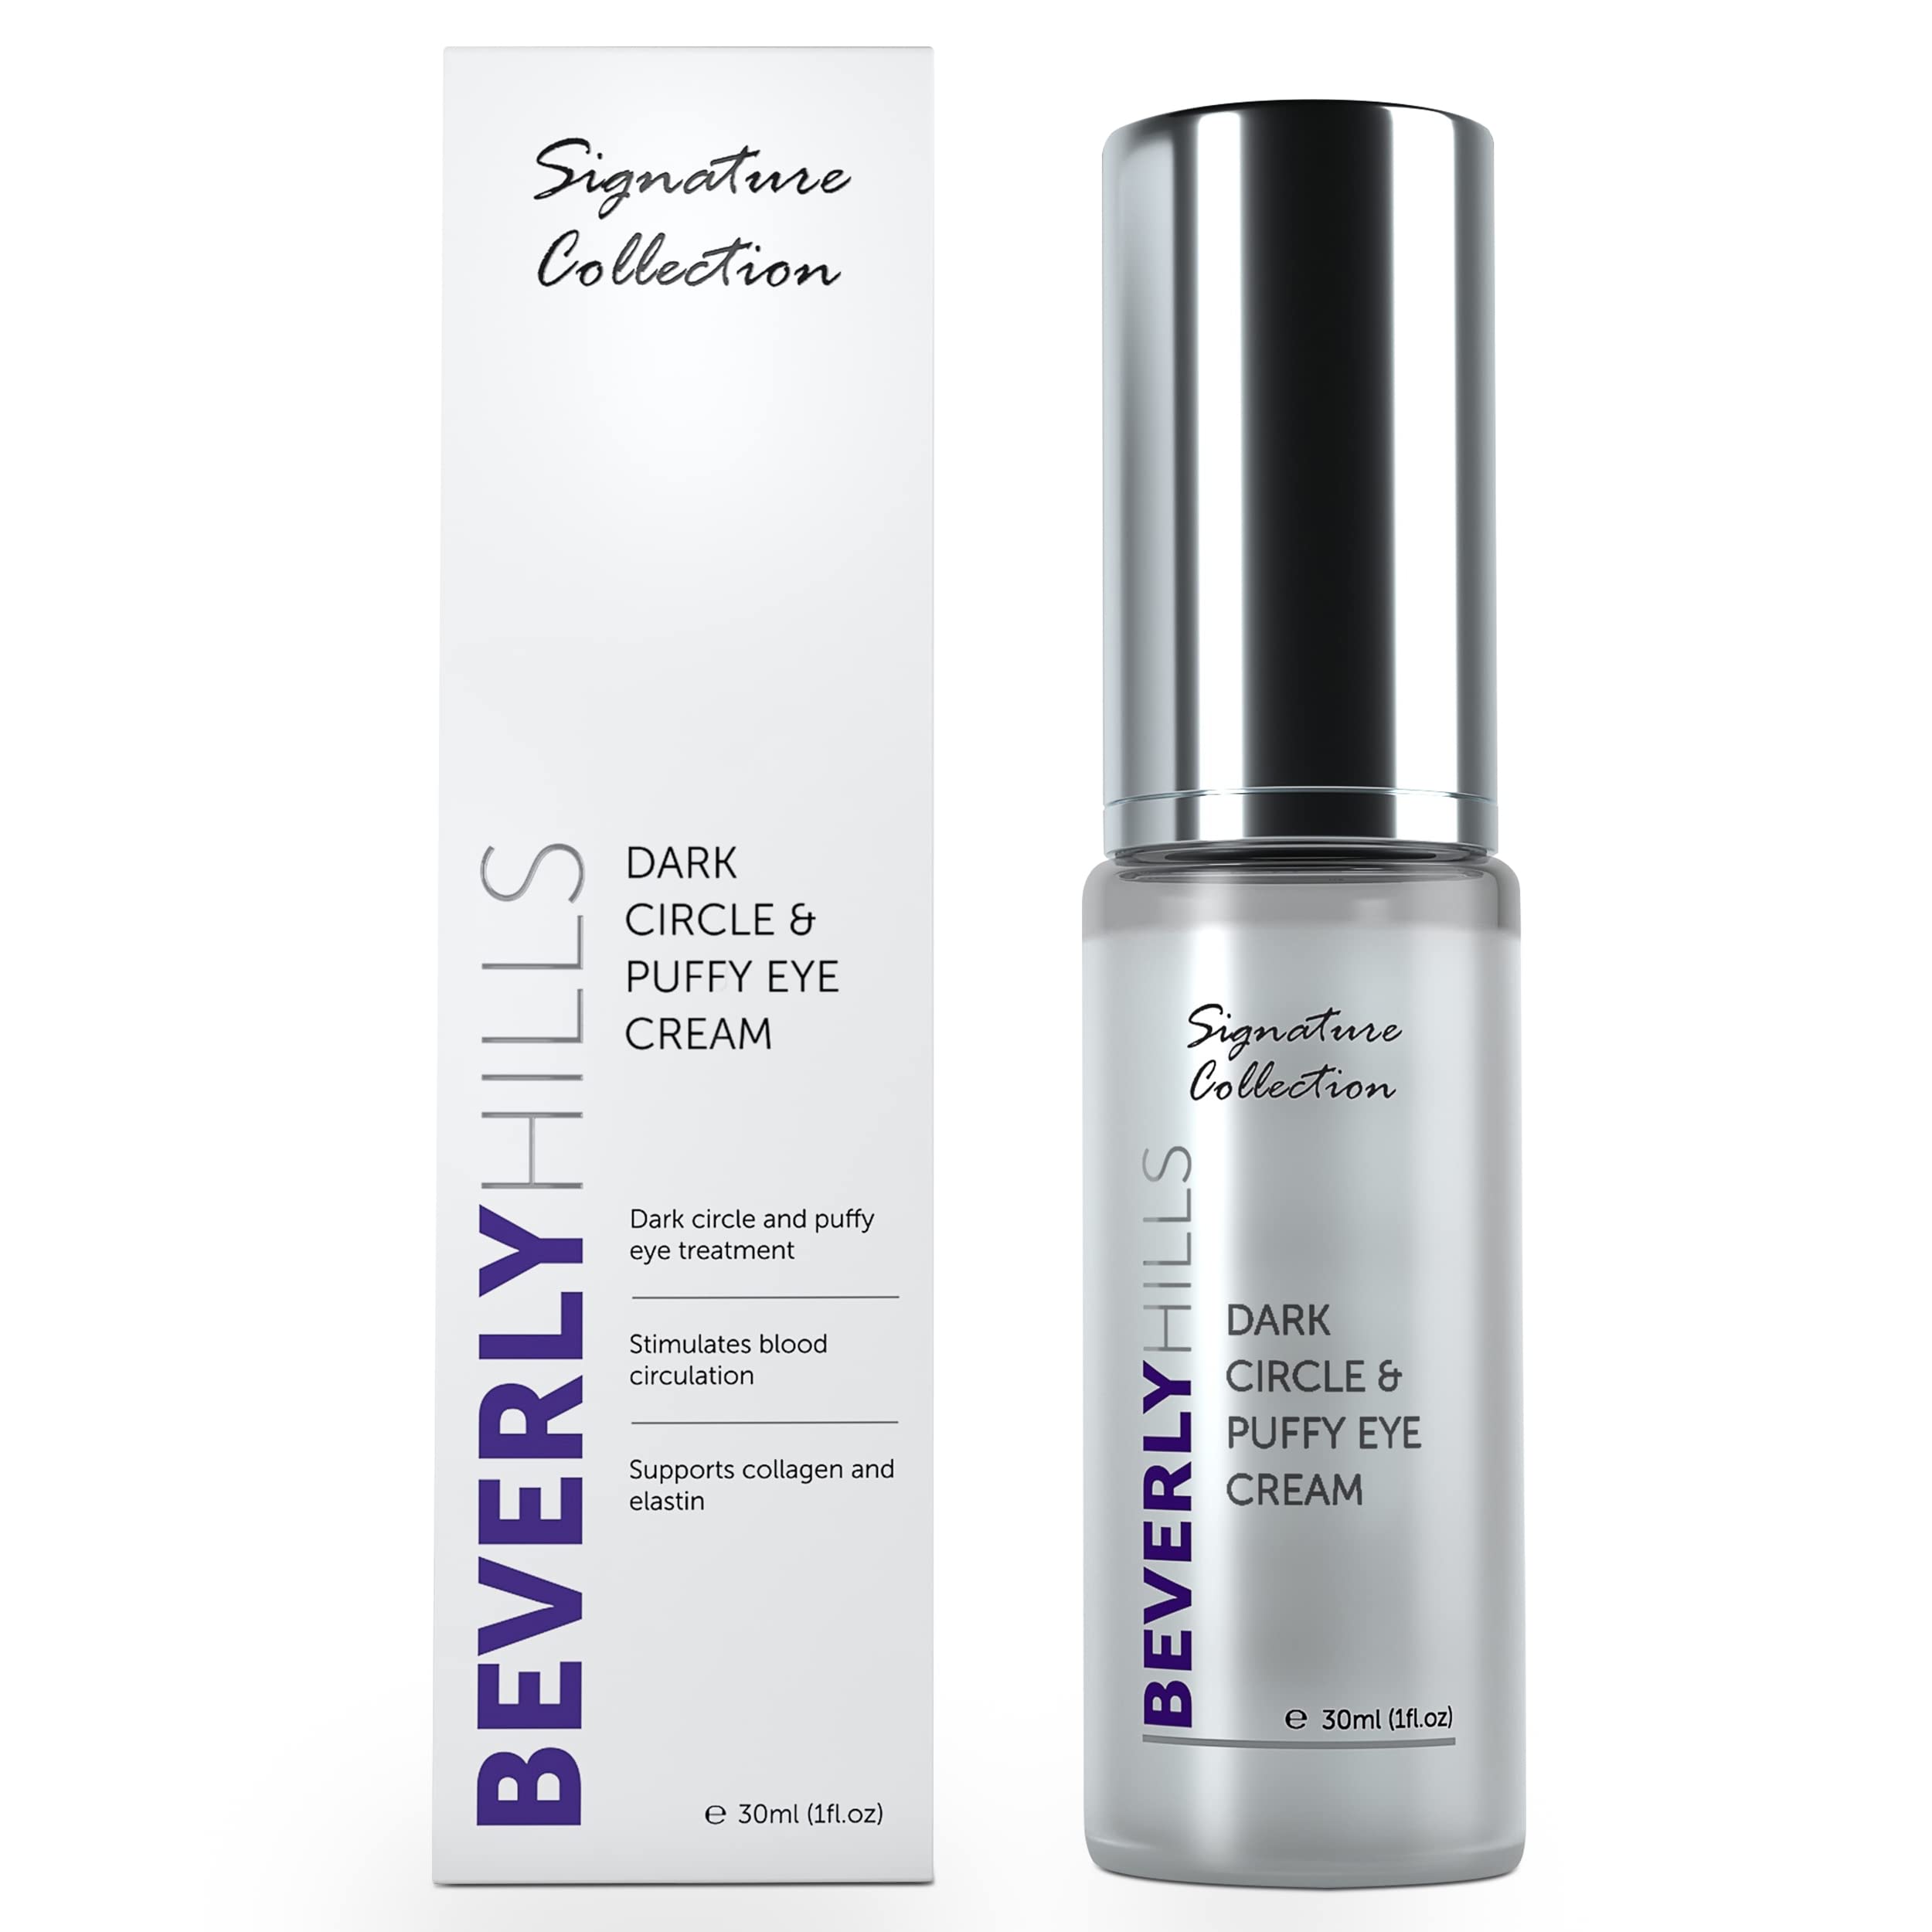 Beverly Hills V-Lift Instant Eye Lift and Eye Tuck Bee Venom Serum for  Puffy Eyes, Dark Circles, Wrinkles, and Under Eye Bags Treatment for Women  and